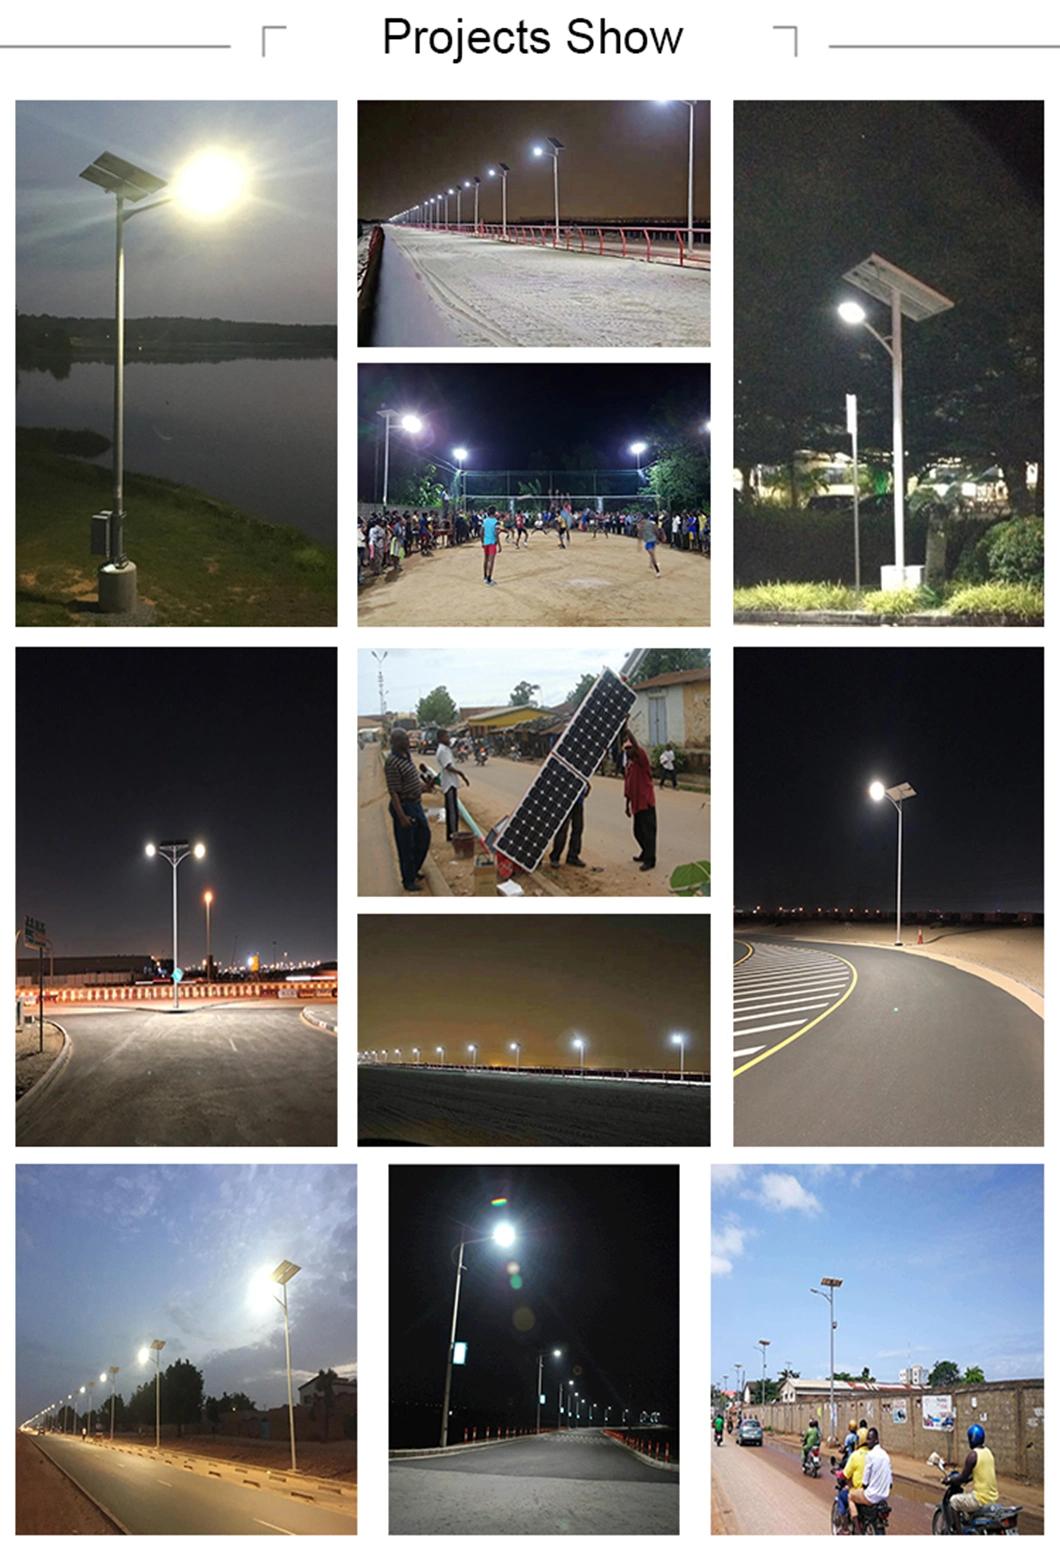 China Good Quality Green Energy 30W Solar Street Light with Lithium Battery Road Lamp LED Solar Street Light